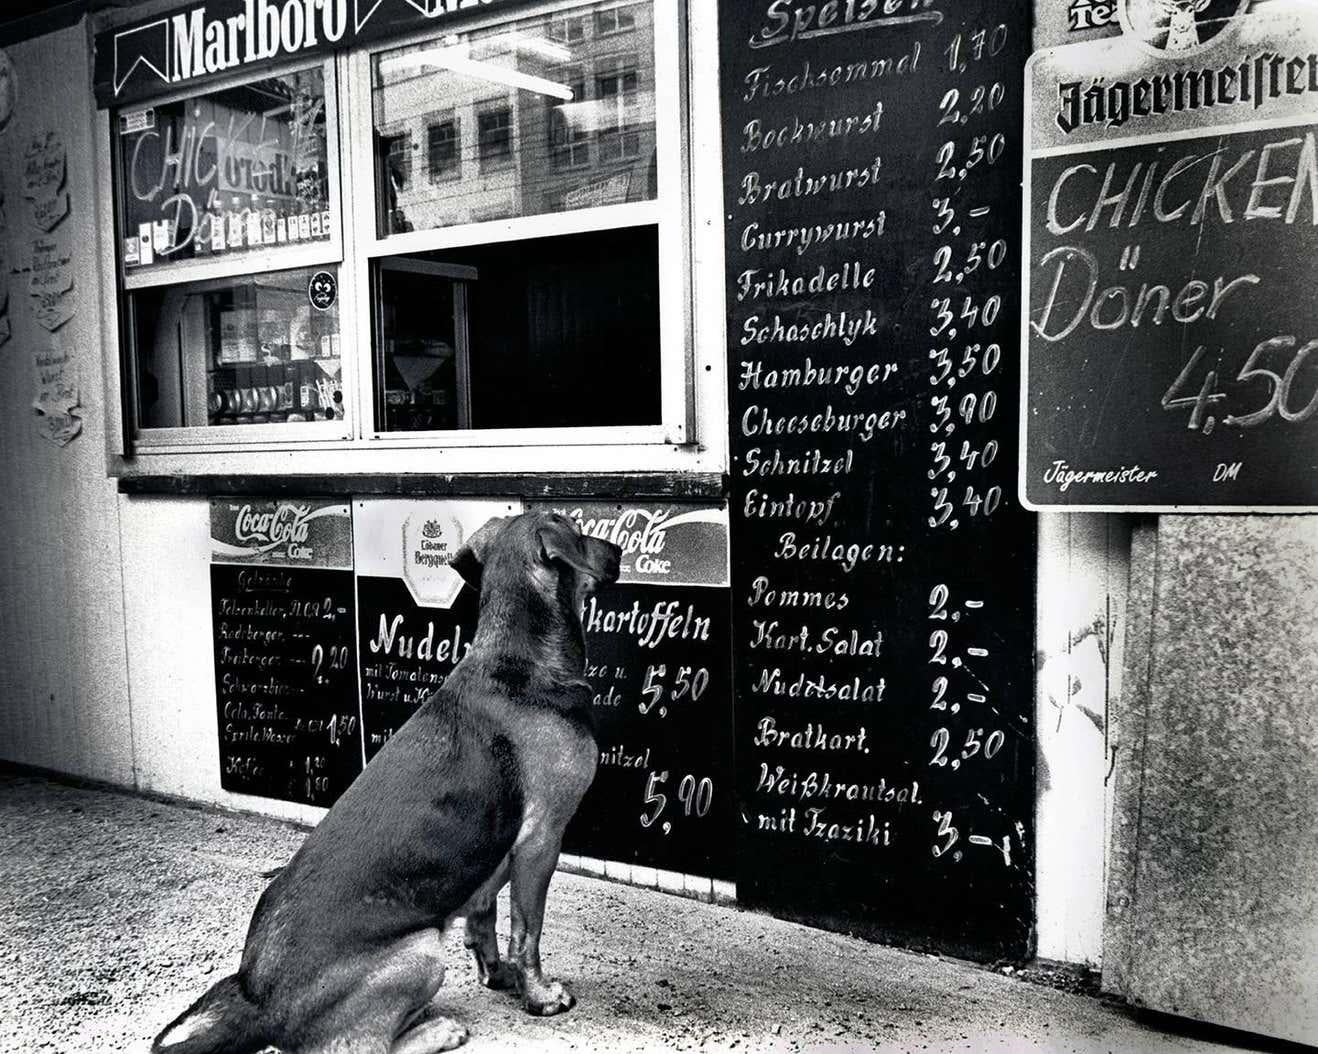 'Schnitzel Please!' Dresden Germany photograph, 1999  - Black Black and White Photograph by Fernando Natalici